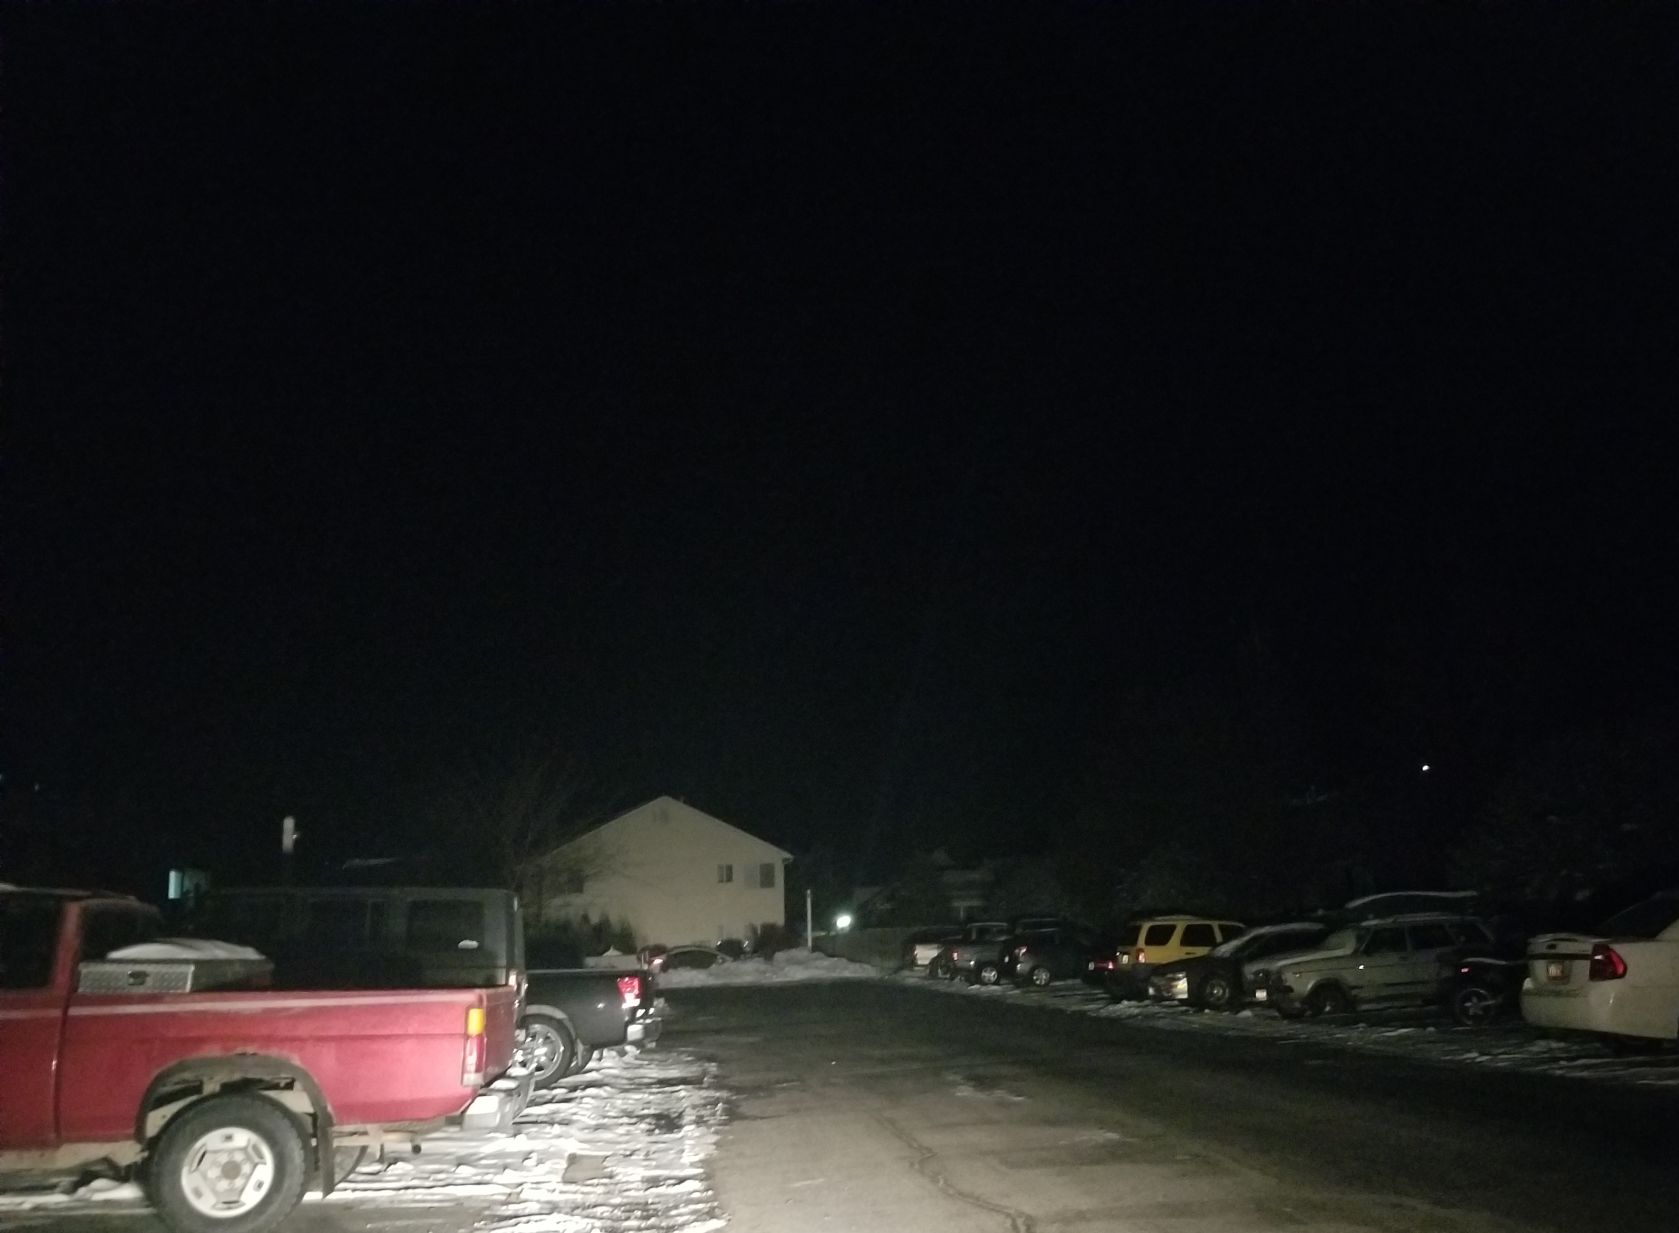 rocky mountain power outage update